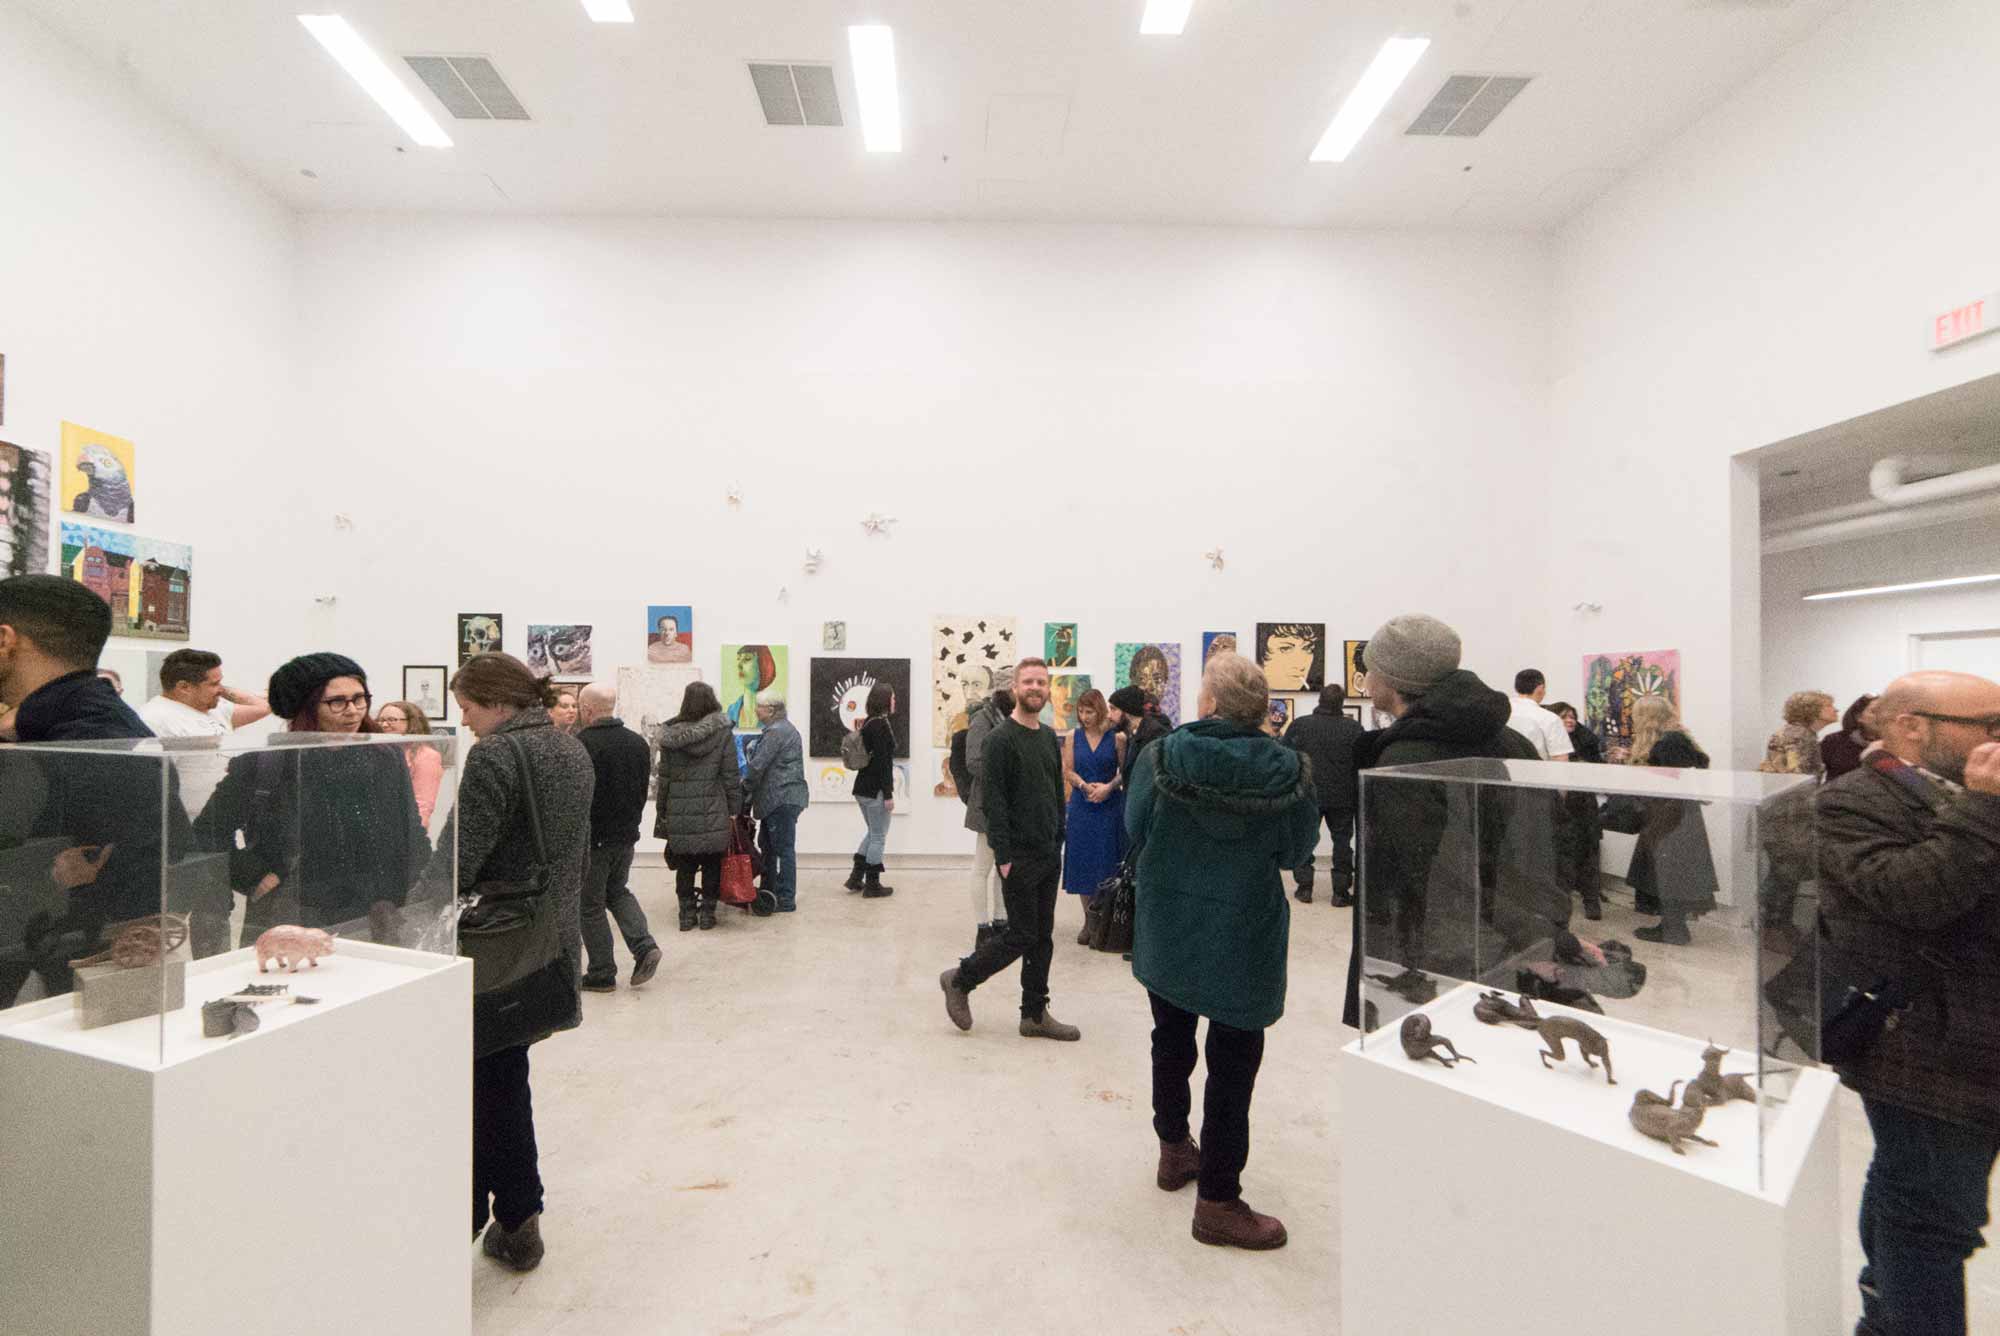 A large group of people fill a gallery space with plinths and artwork on walls at an opening reception.